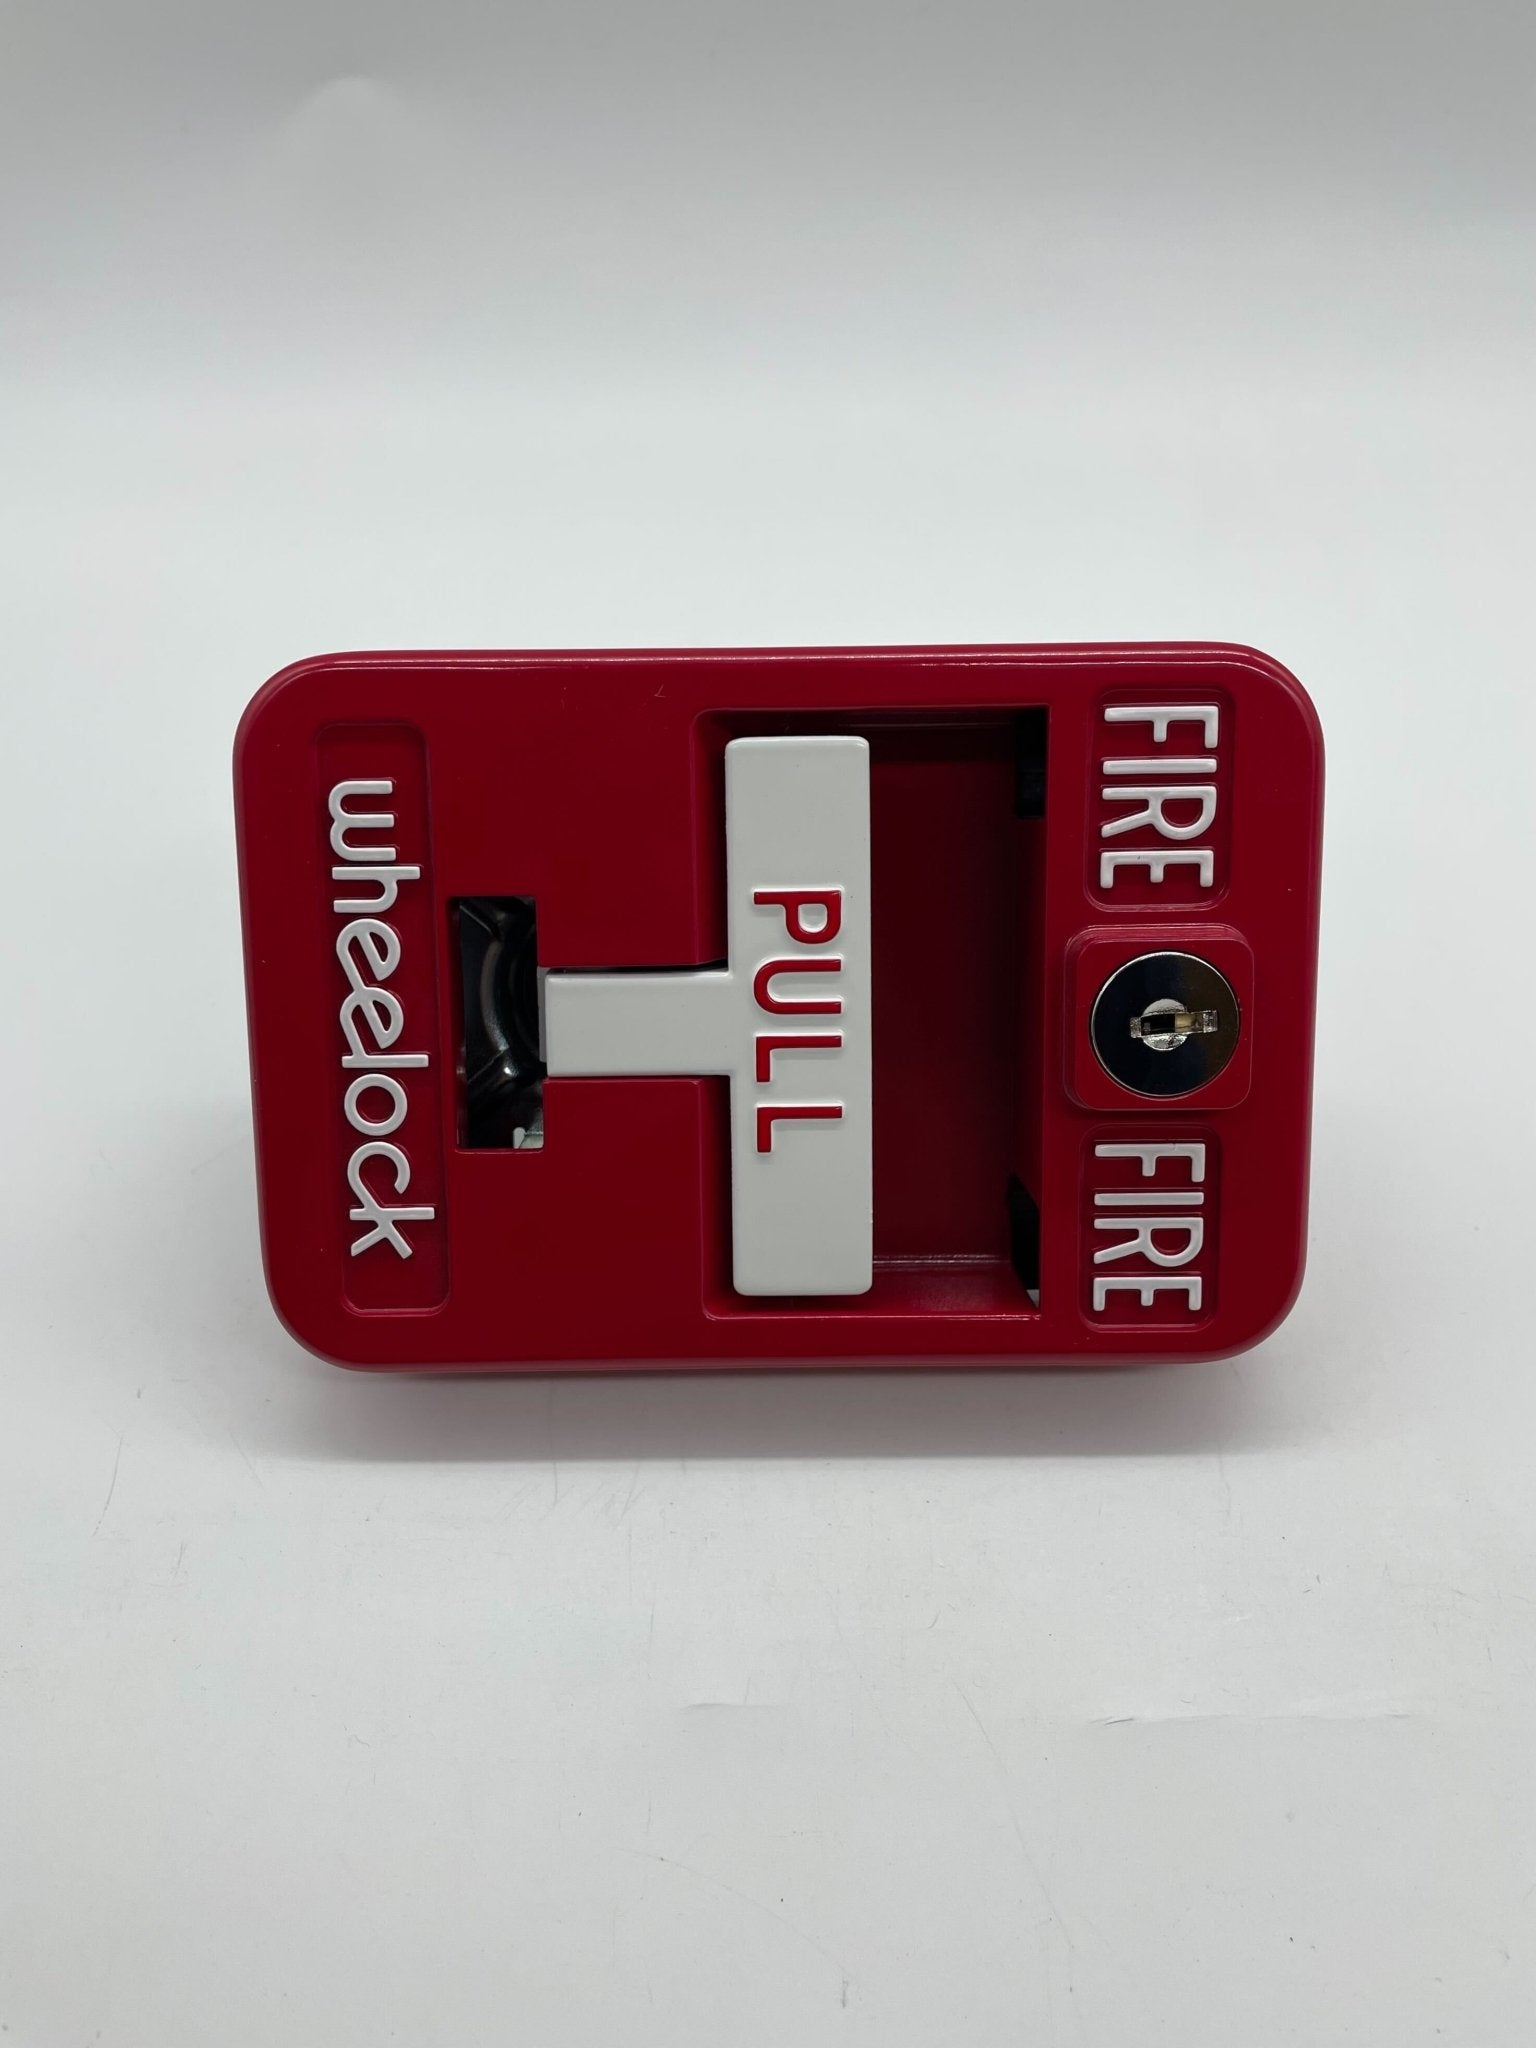 Wheelock MPS-100 - The Fire Alarm Supplier